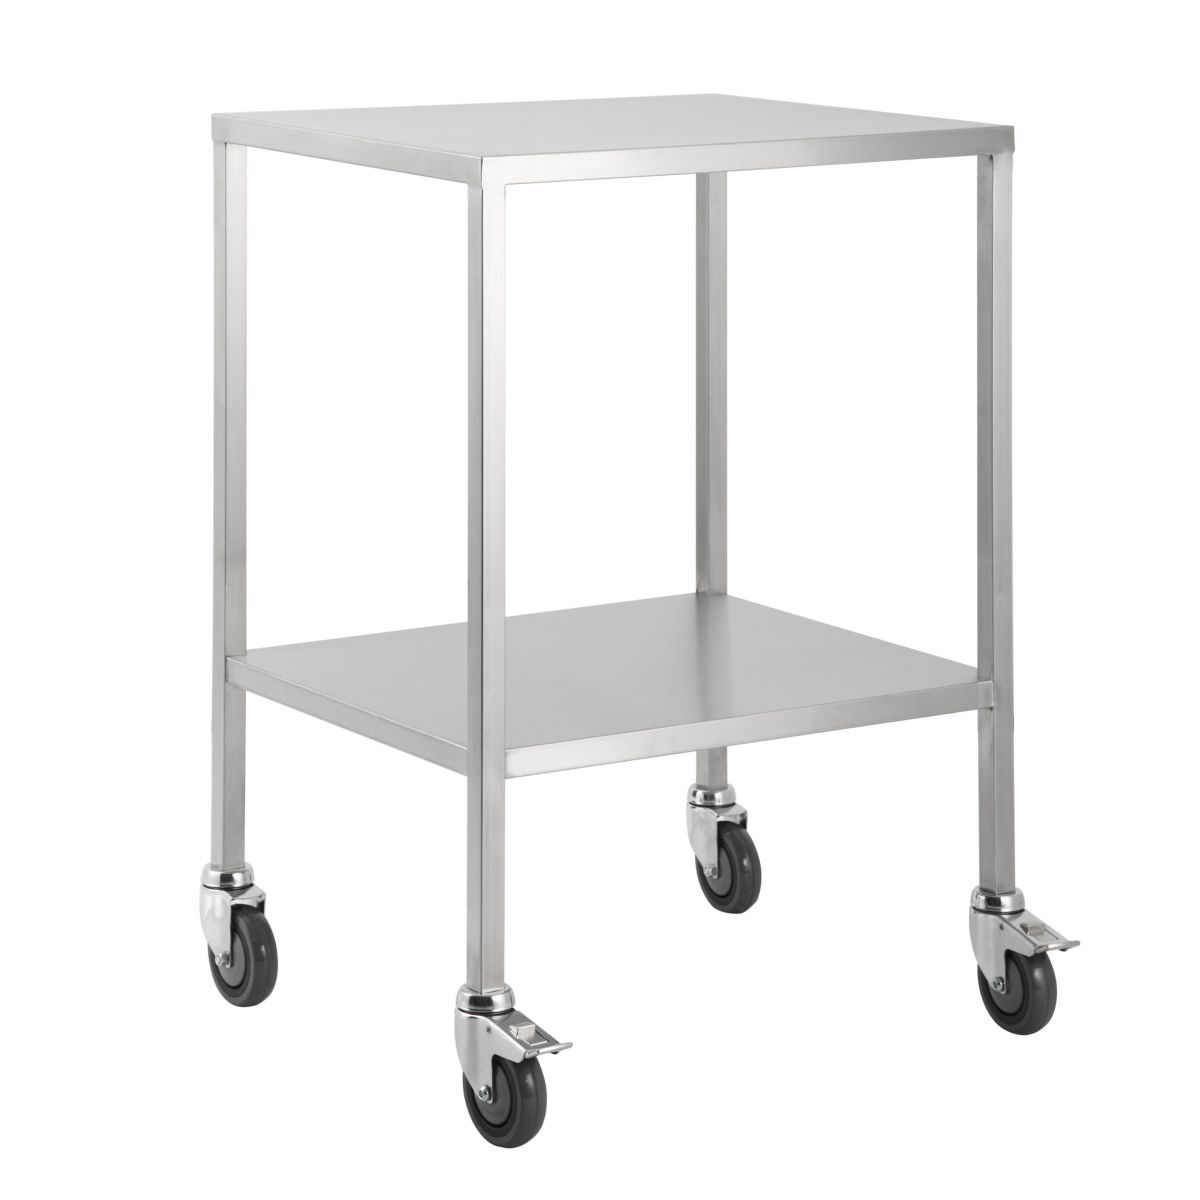 Single stainless steel trolley with no rails